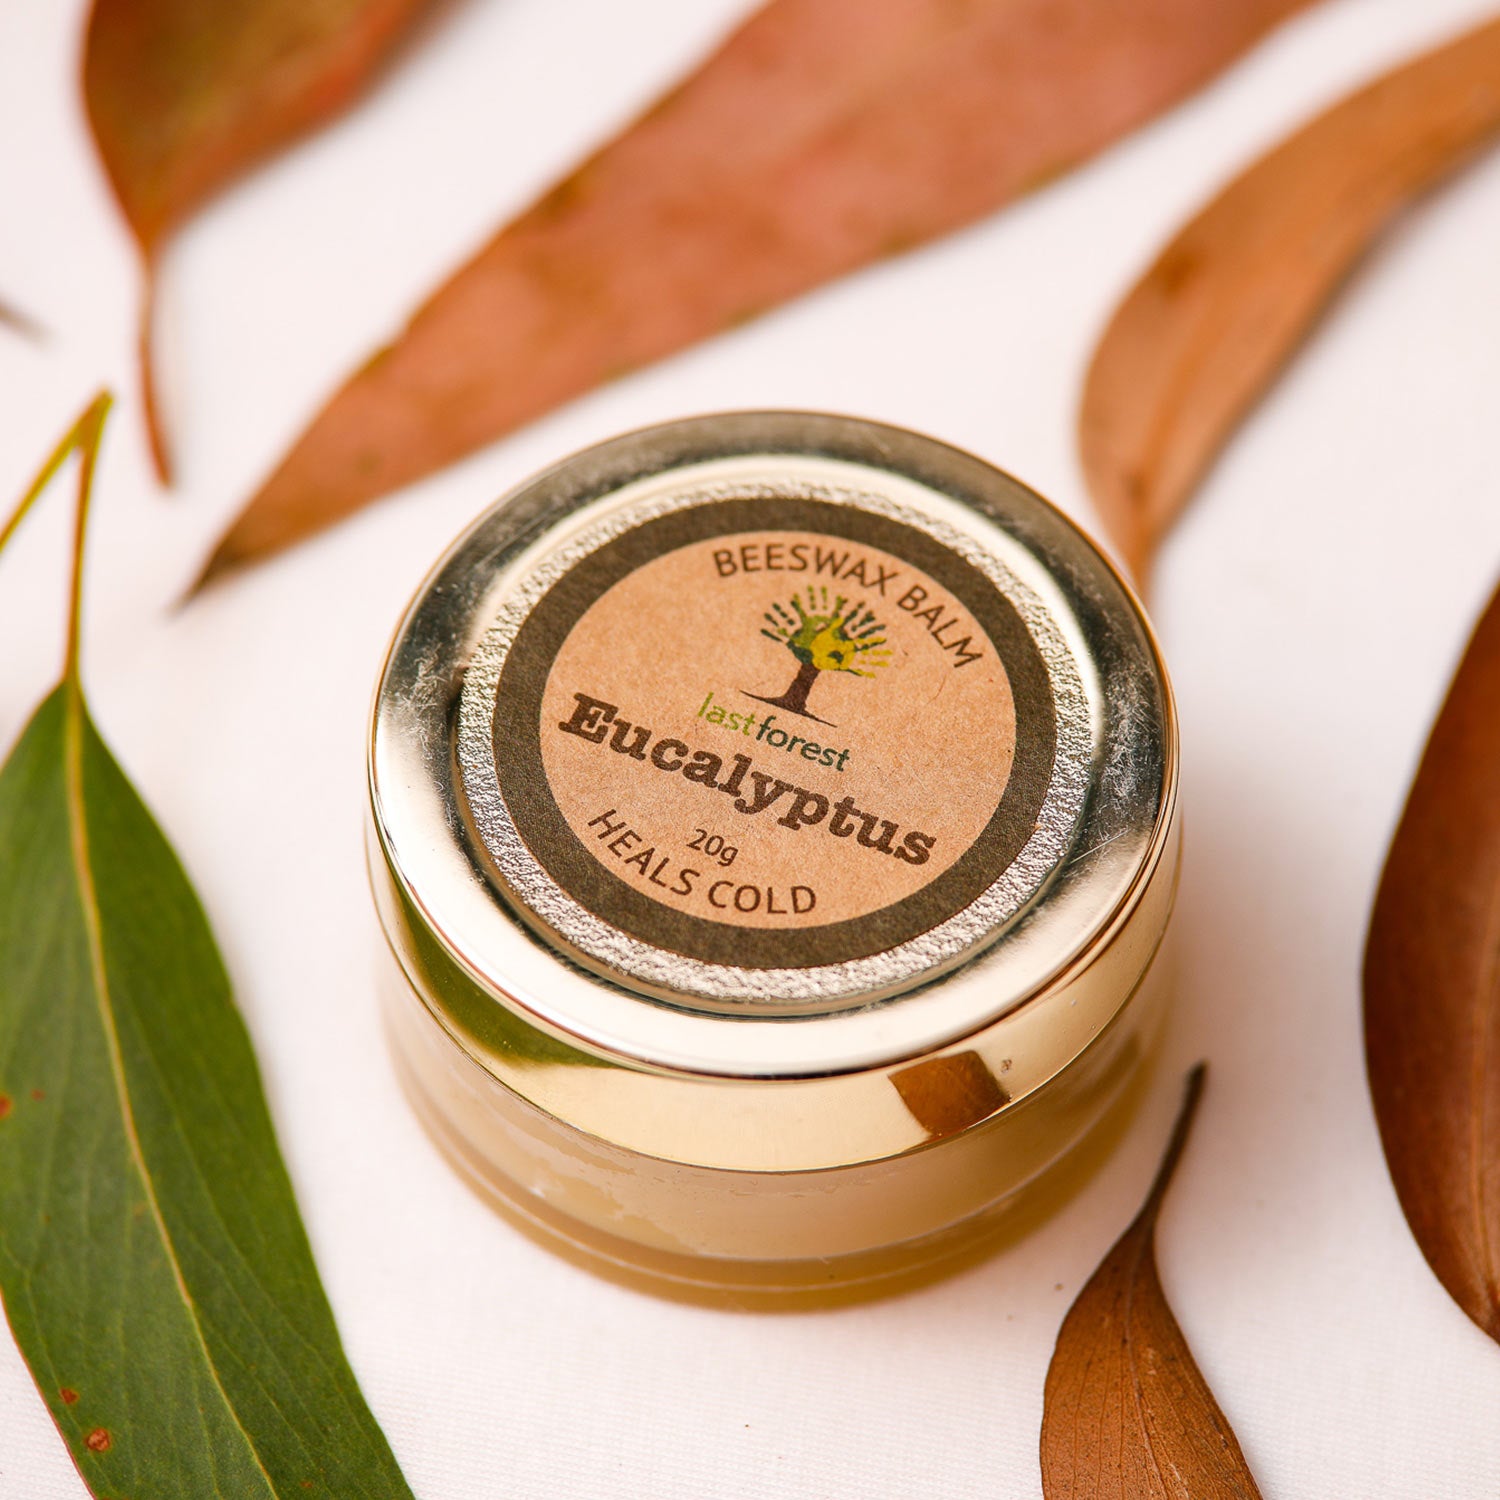 Last Forest Eucalyptus Balm for Cold and Clogged Nose 20g